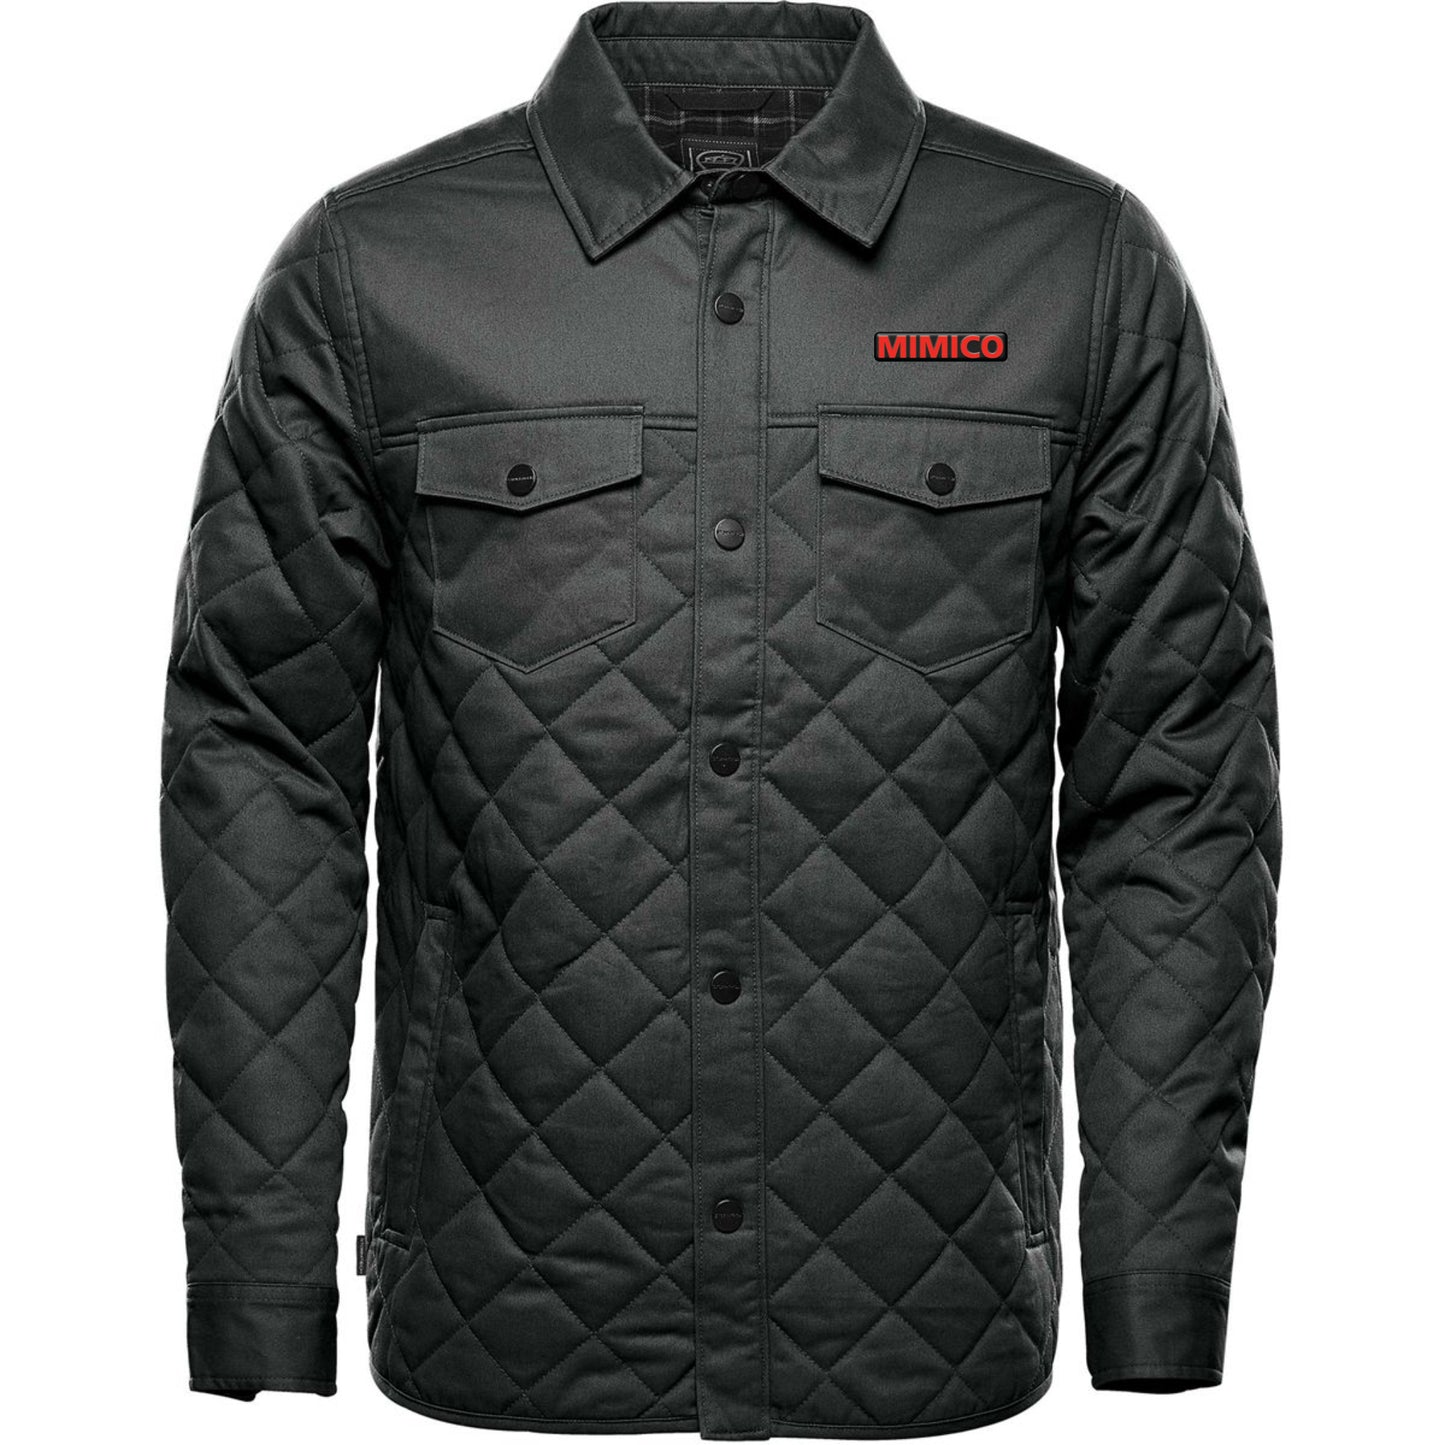 MIMICO BUSHWICK QUILTED JACKET